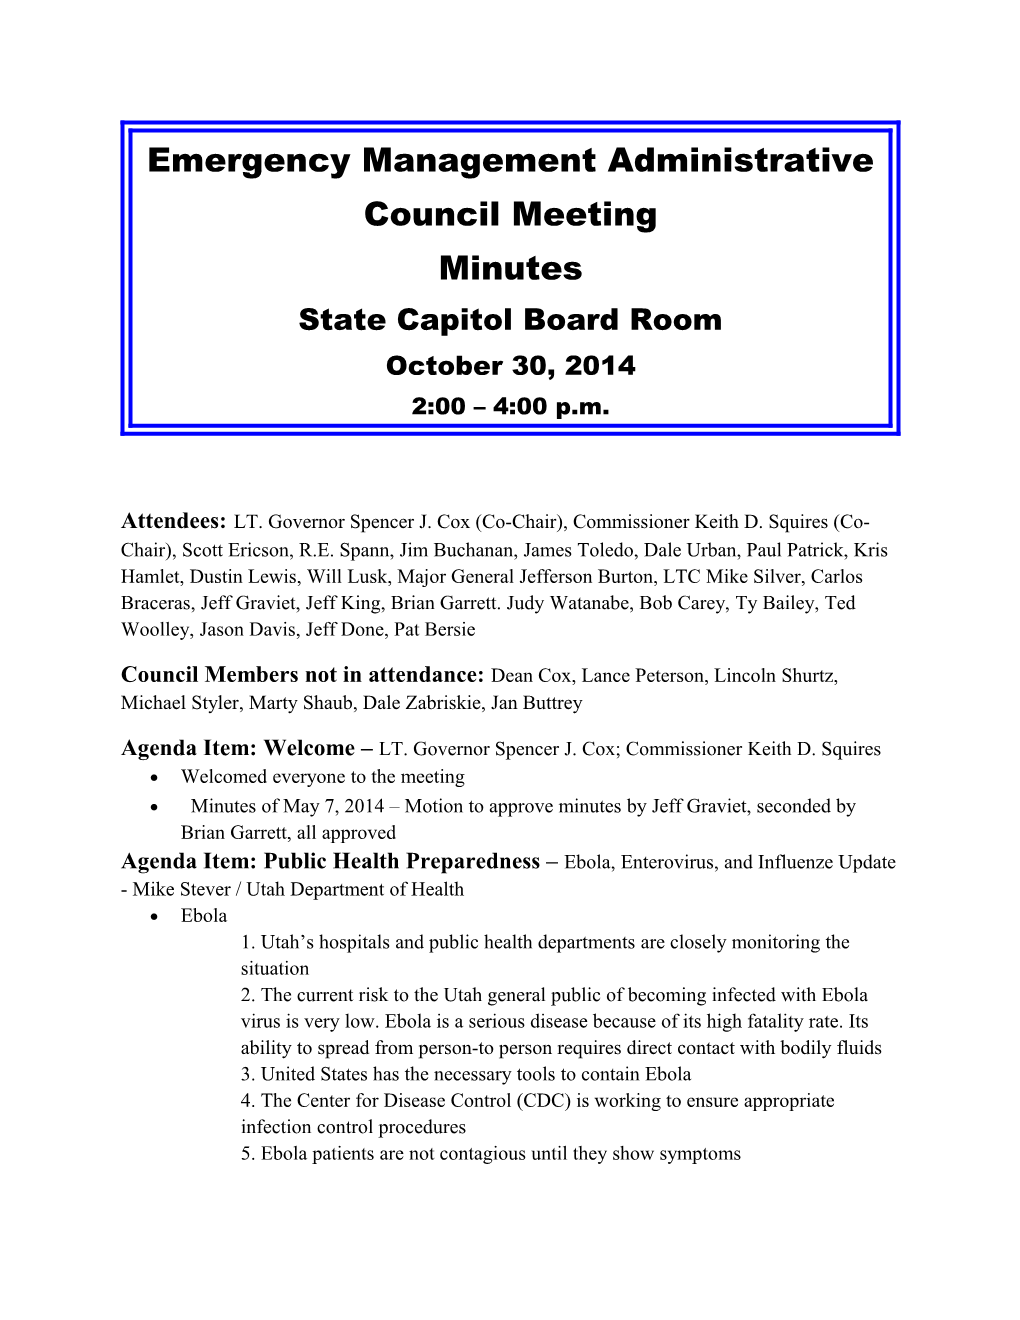 Emergency Management Administrative Council Meeting